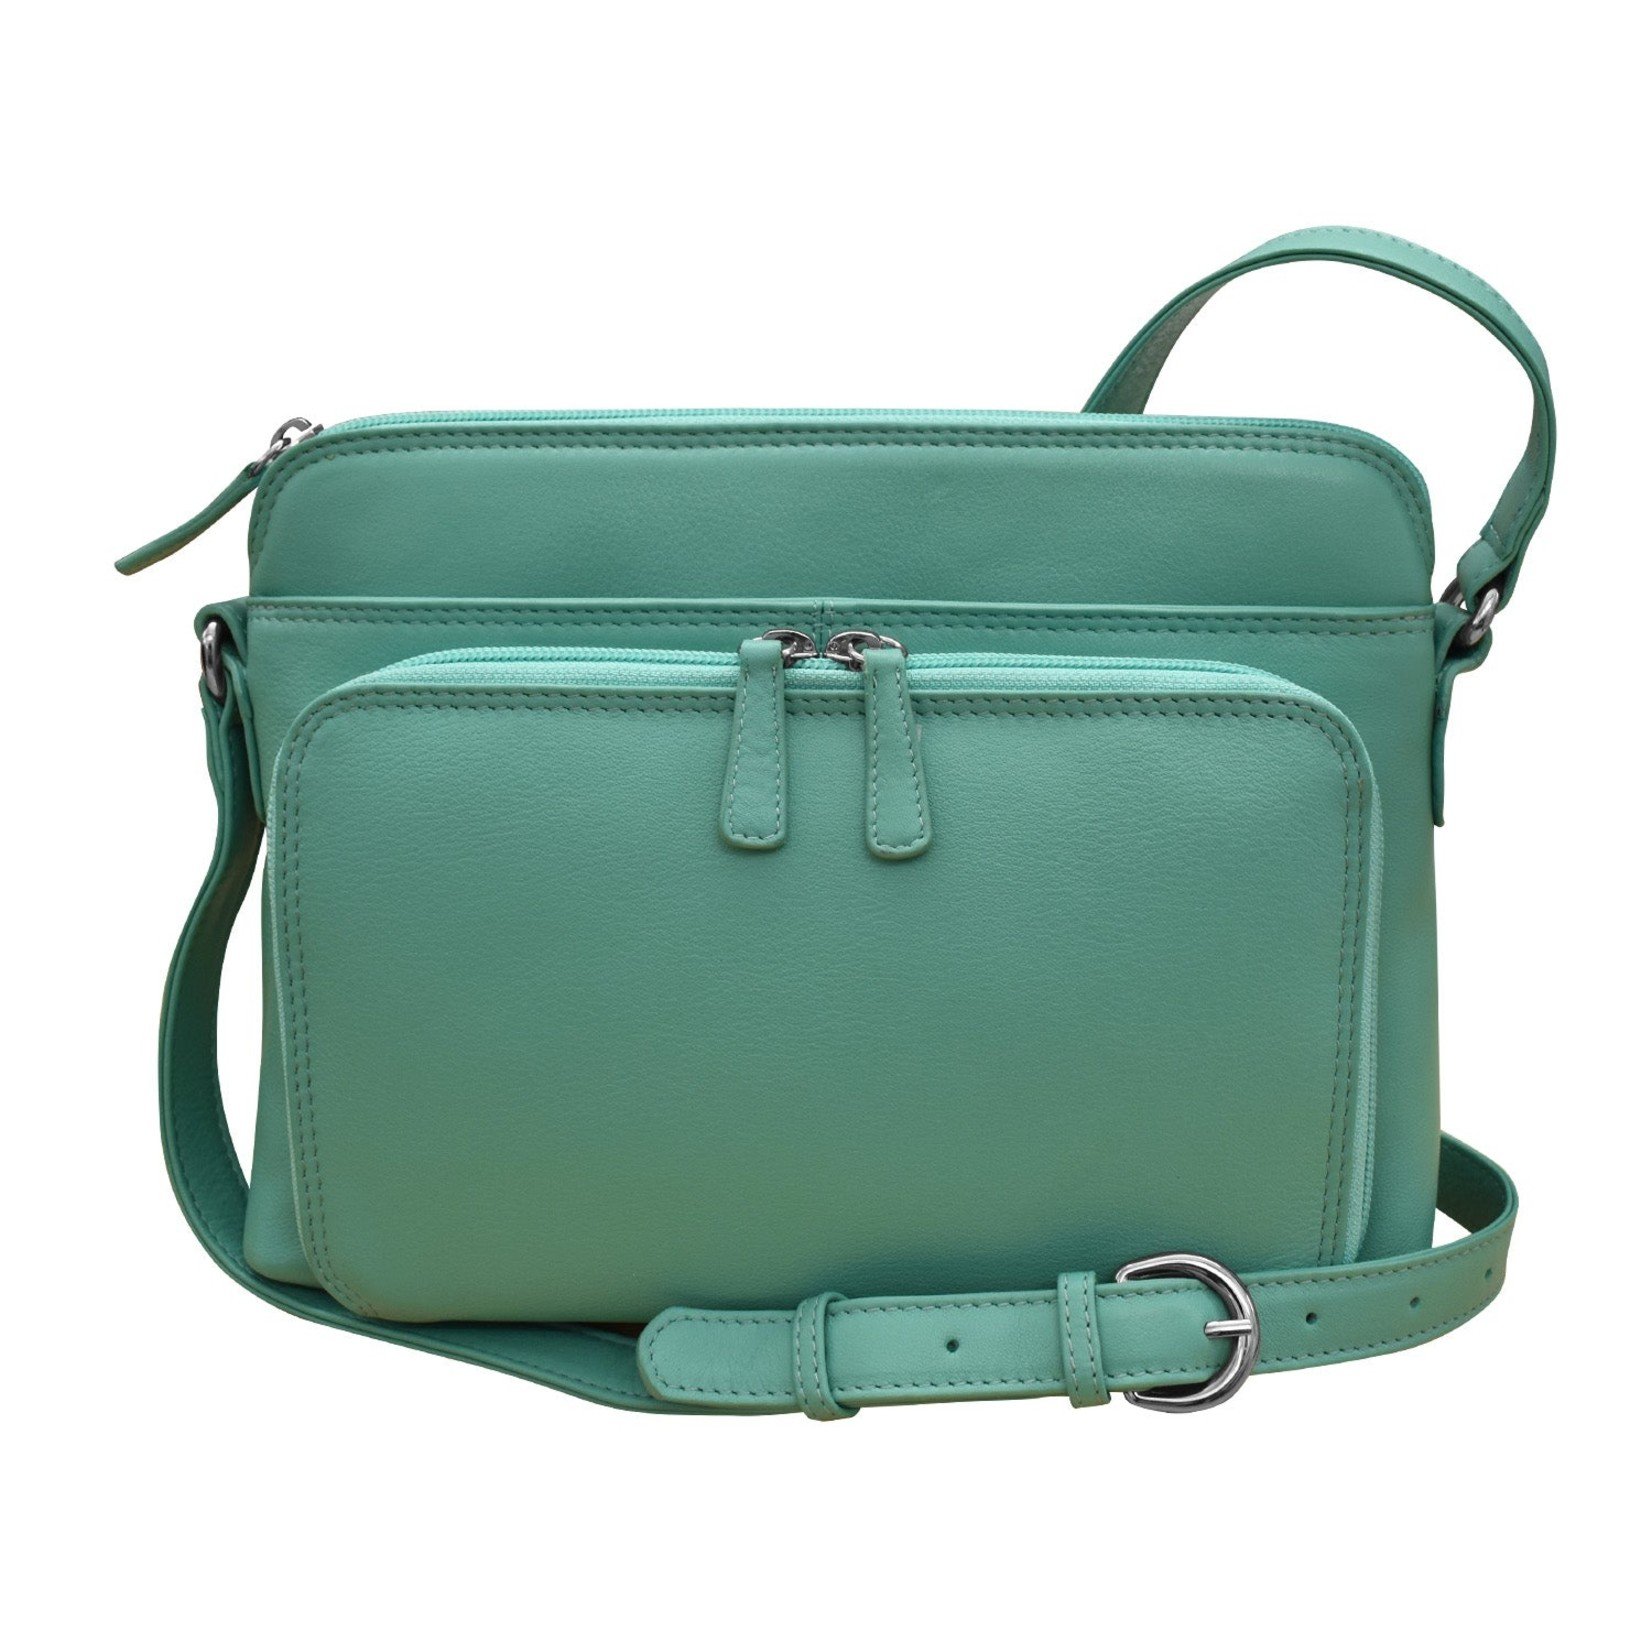 Leather Handbags and Accessories 6333 Turquoise - Organizer Bag